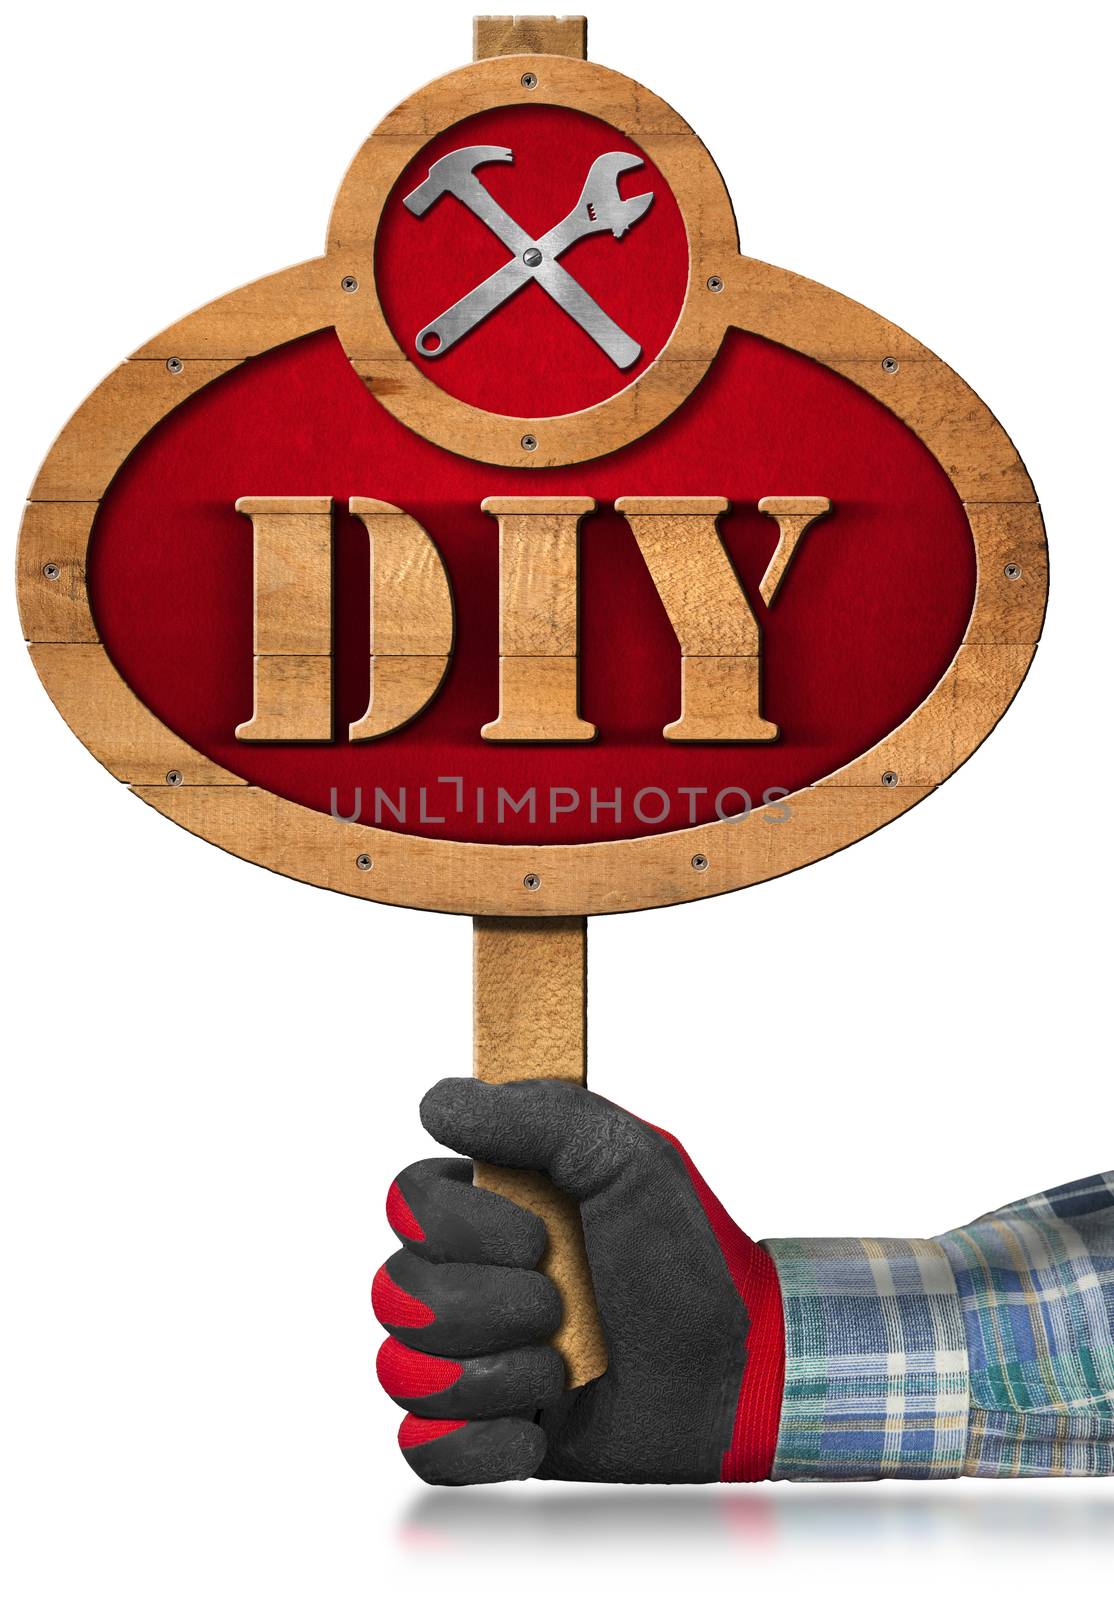 Hand with work glove holding a oval wooden and red sign with text Diy (Do it yourself) and a symbol with hammer and wrench. Isolated on white background